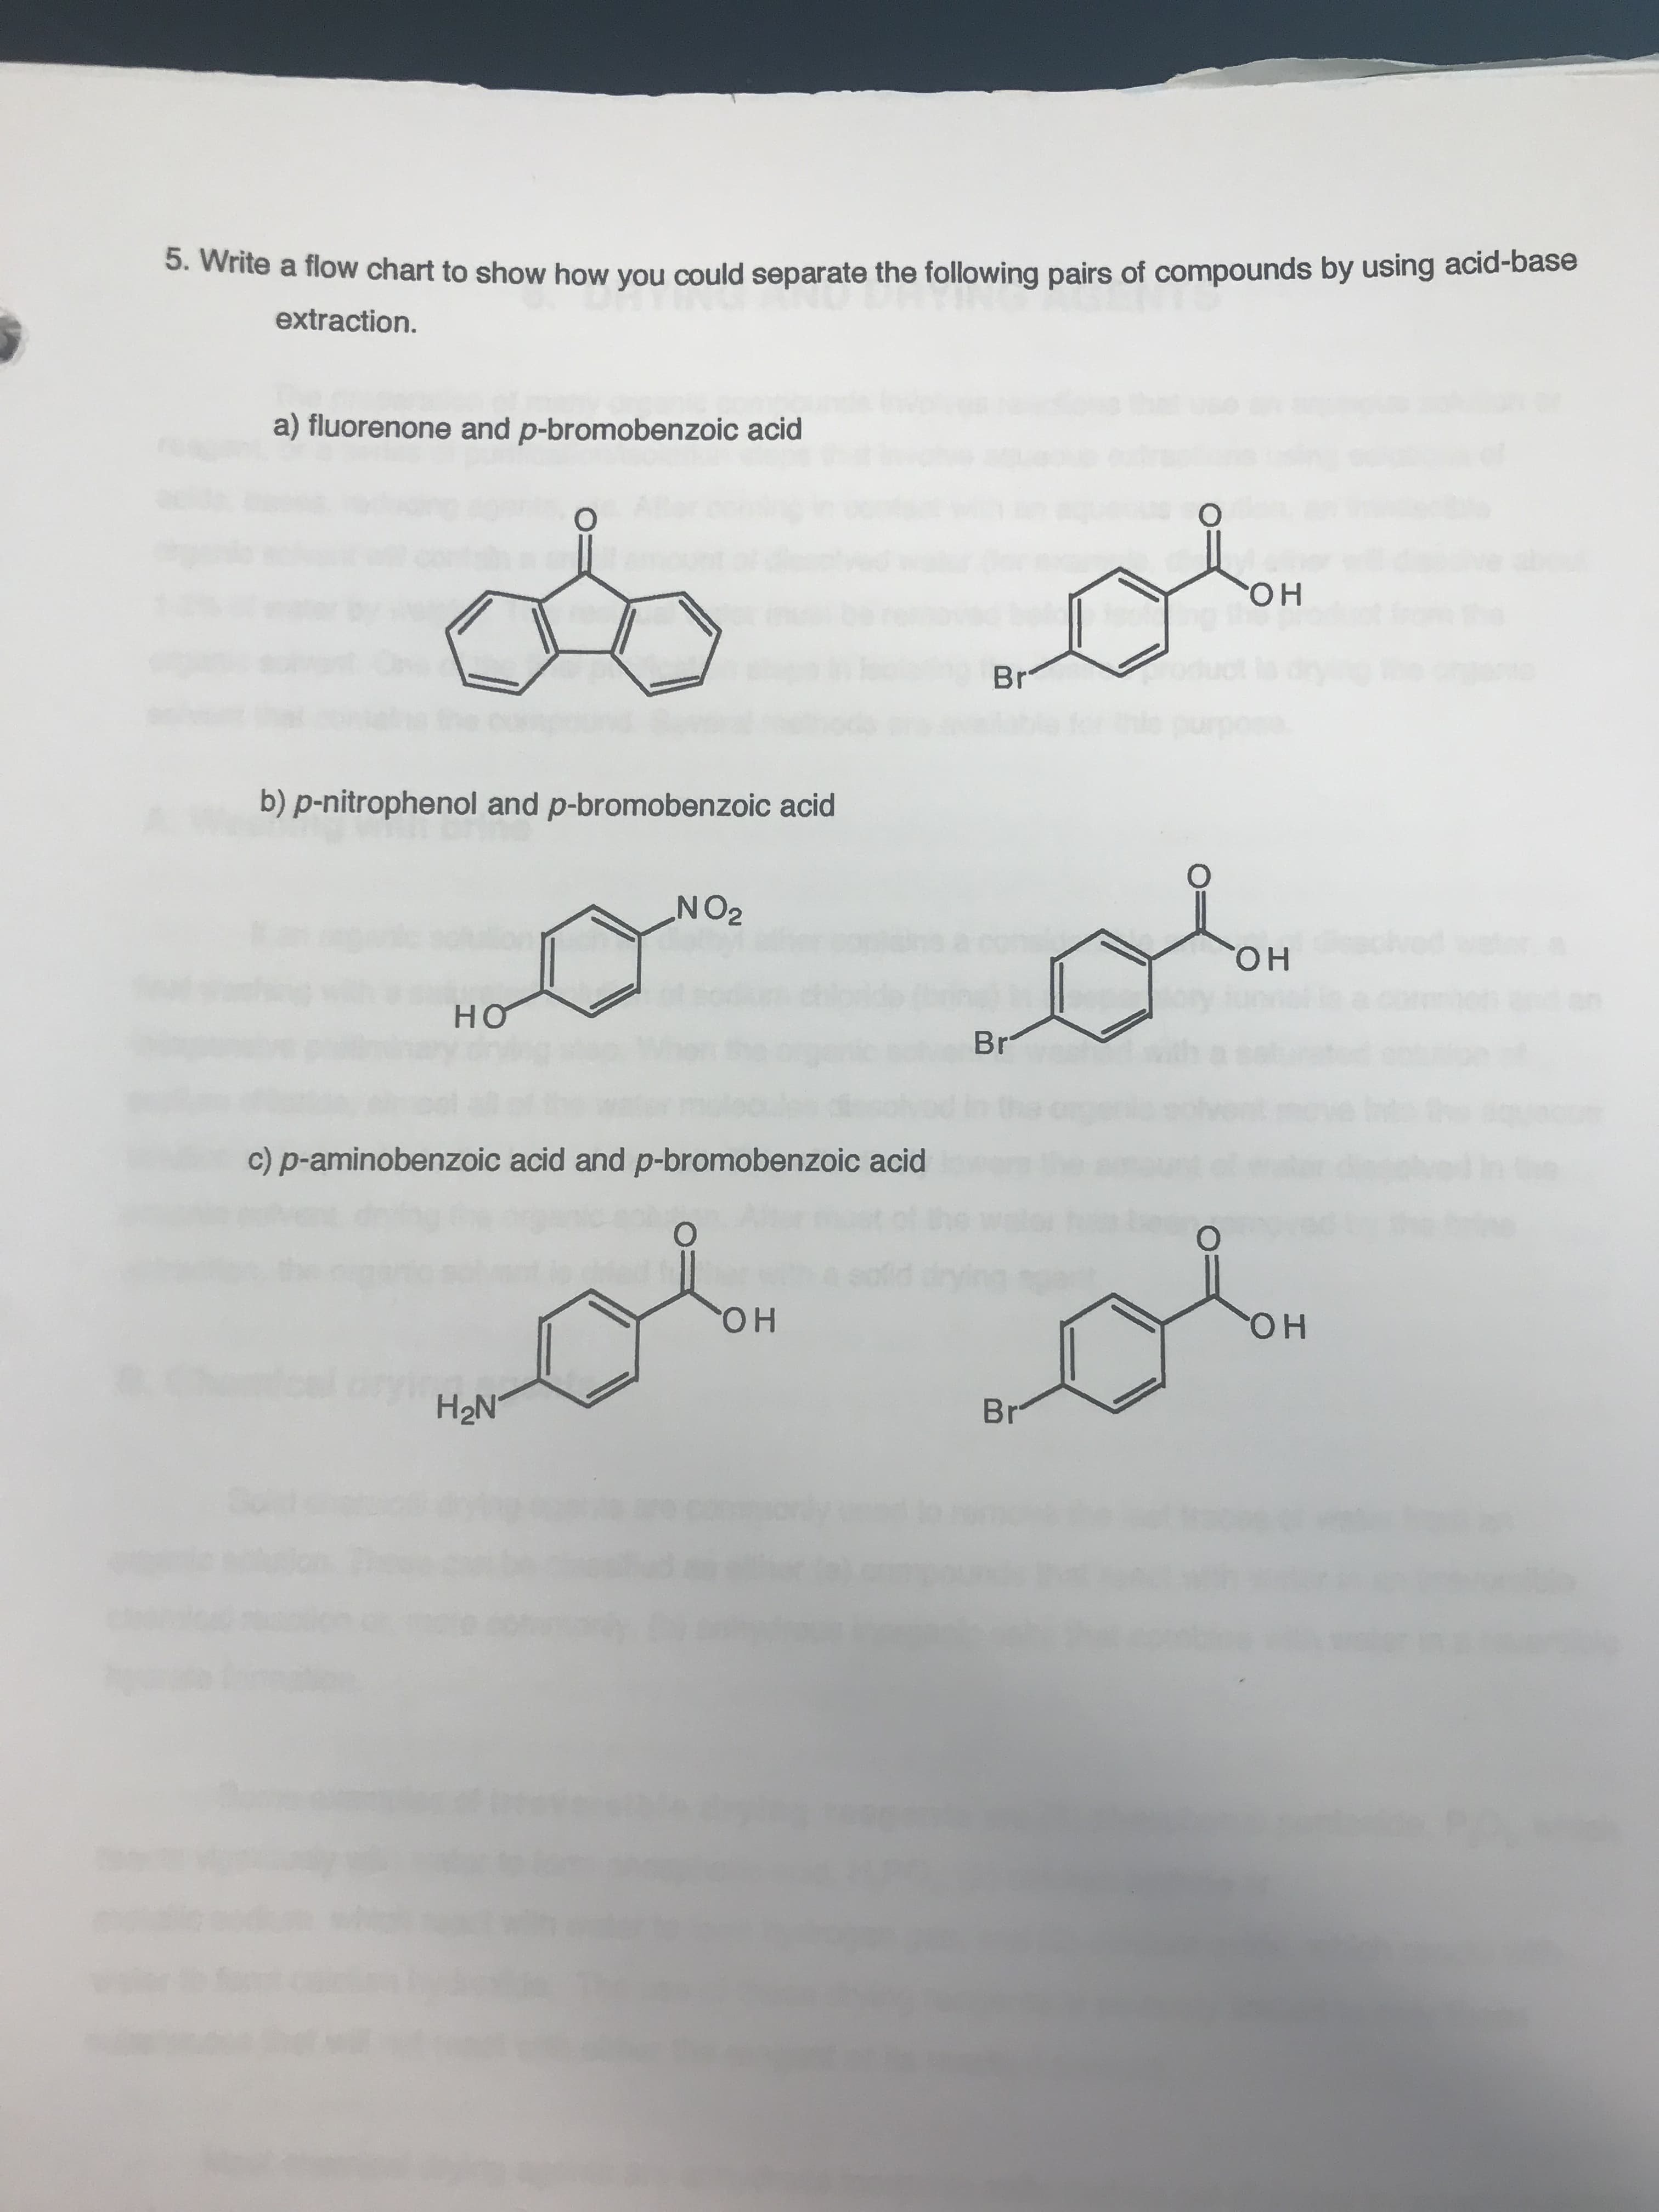 5. Write a flow chart to show how you could separate the following pairs of compounds by using acid-base
extraction.
a) fluorenone and p-bromobenzoic acid
O
OH
Br*
urpe
b) p-nitrophenol and p-bromobenzoic acid
OH
HO
Br
c) p-aminobenzoic acid and p-bromobenzoic acid
O
O
dyin
OH
OH
H2N
Br
